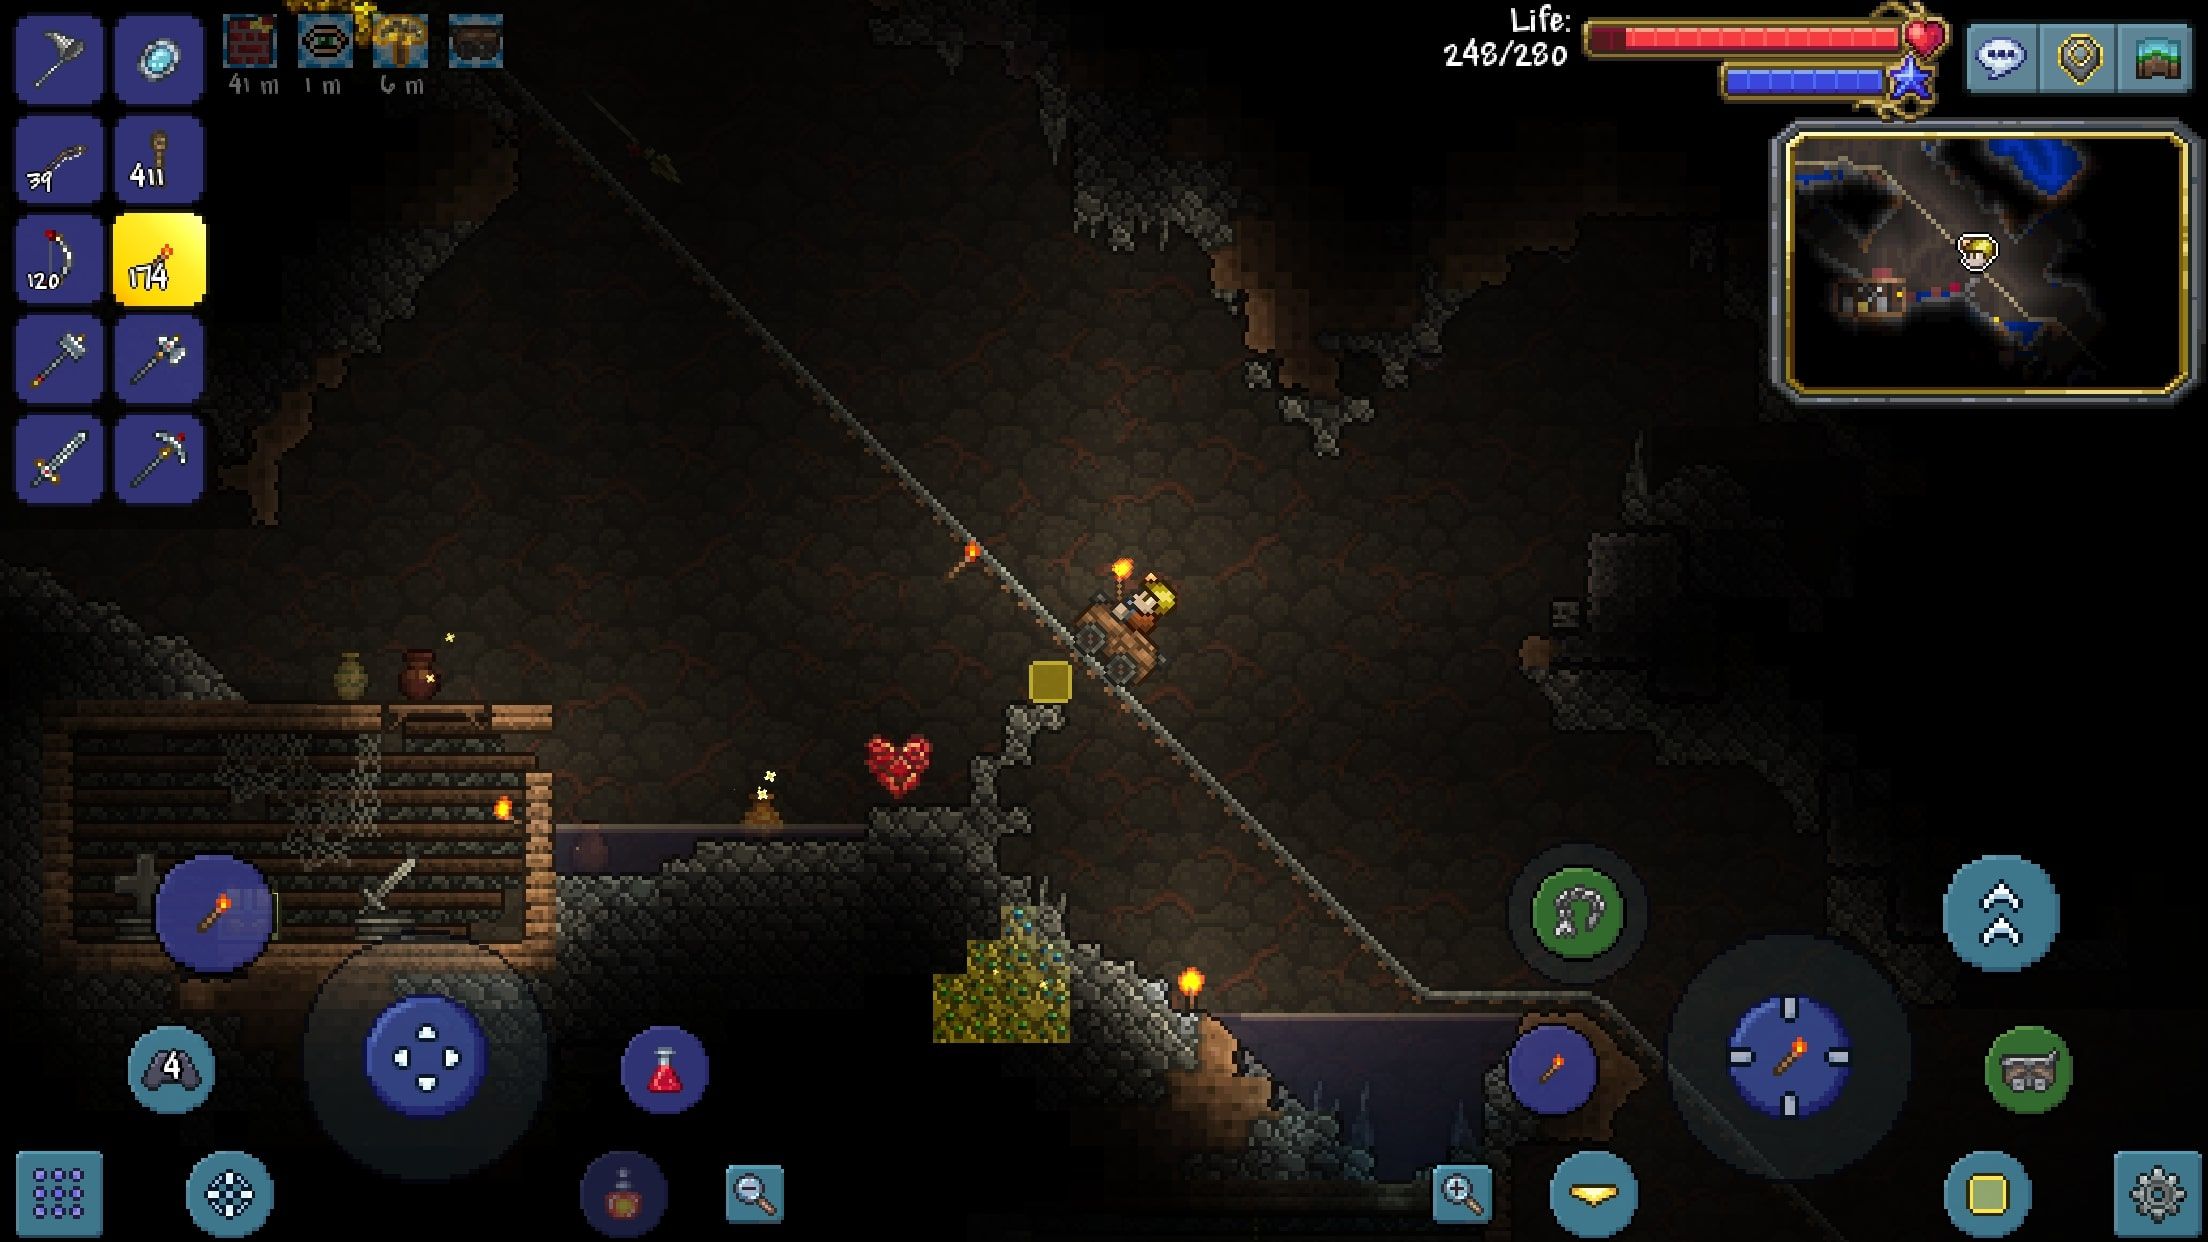 Terraria showing a character driving in a mine cart in a dark dungeon